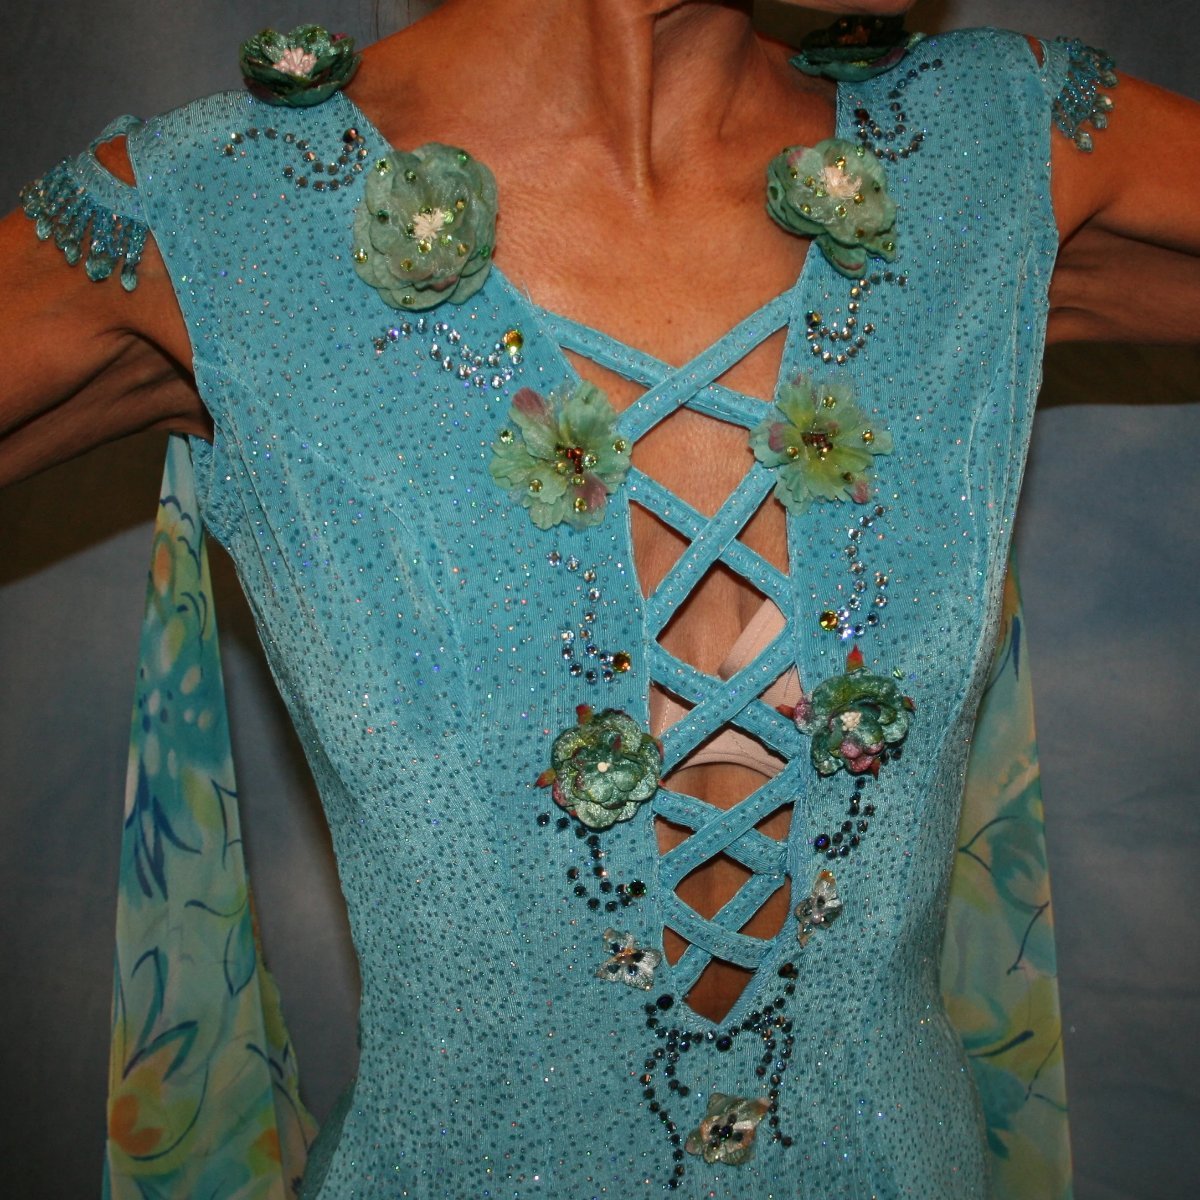 Crystal's Creations close up view of Turquoise ballroom dress of turquoise glitter slinky features lattice work detailing with yards & yards of print chiffon, enhanced with velveteen flowers plus aquamarine Swarovski rhinestones, hand beading on shoulder detailing... with detachable floats.